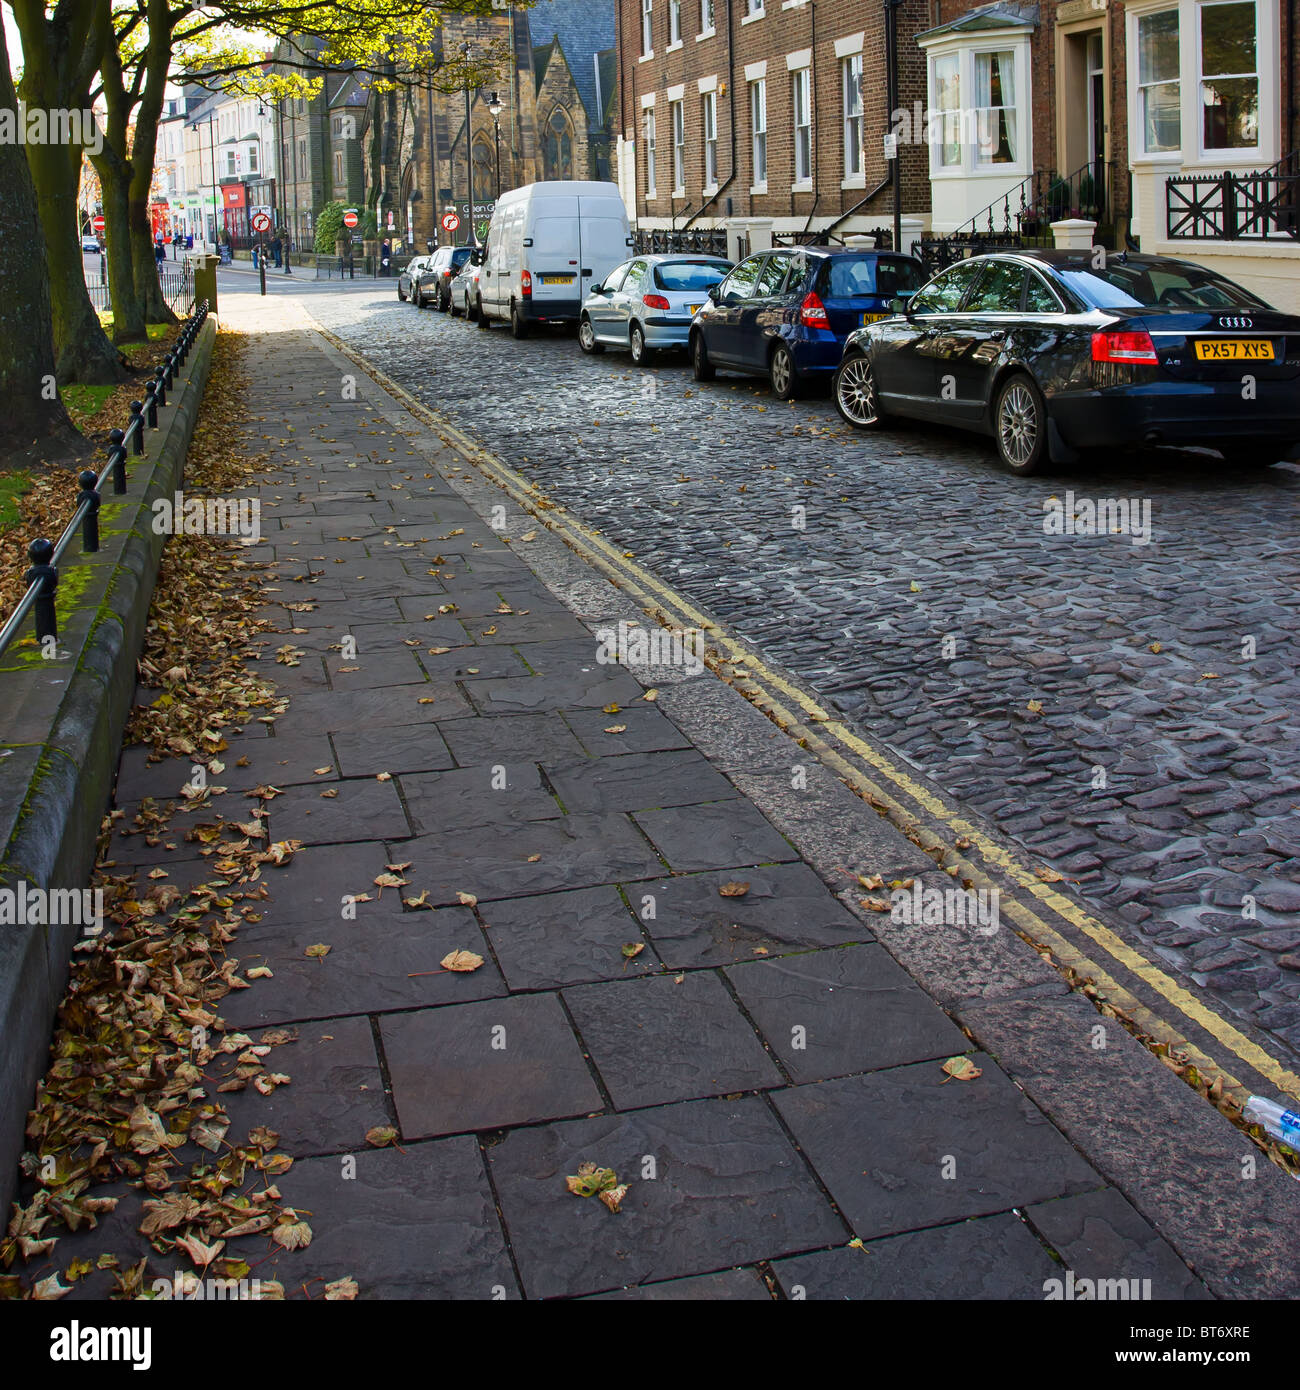 Quiet Cobbled Street in Tynemouth, North East England. Stock Photo